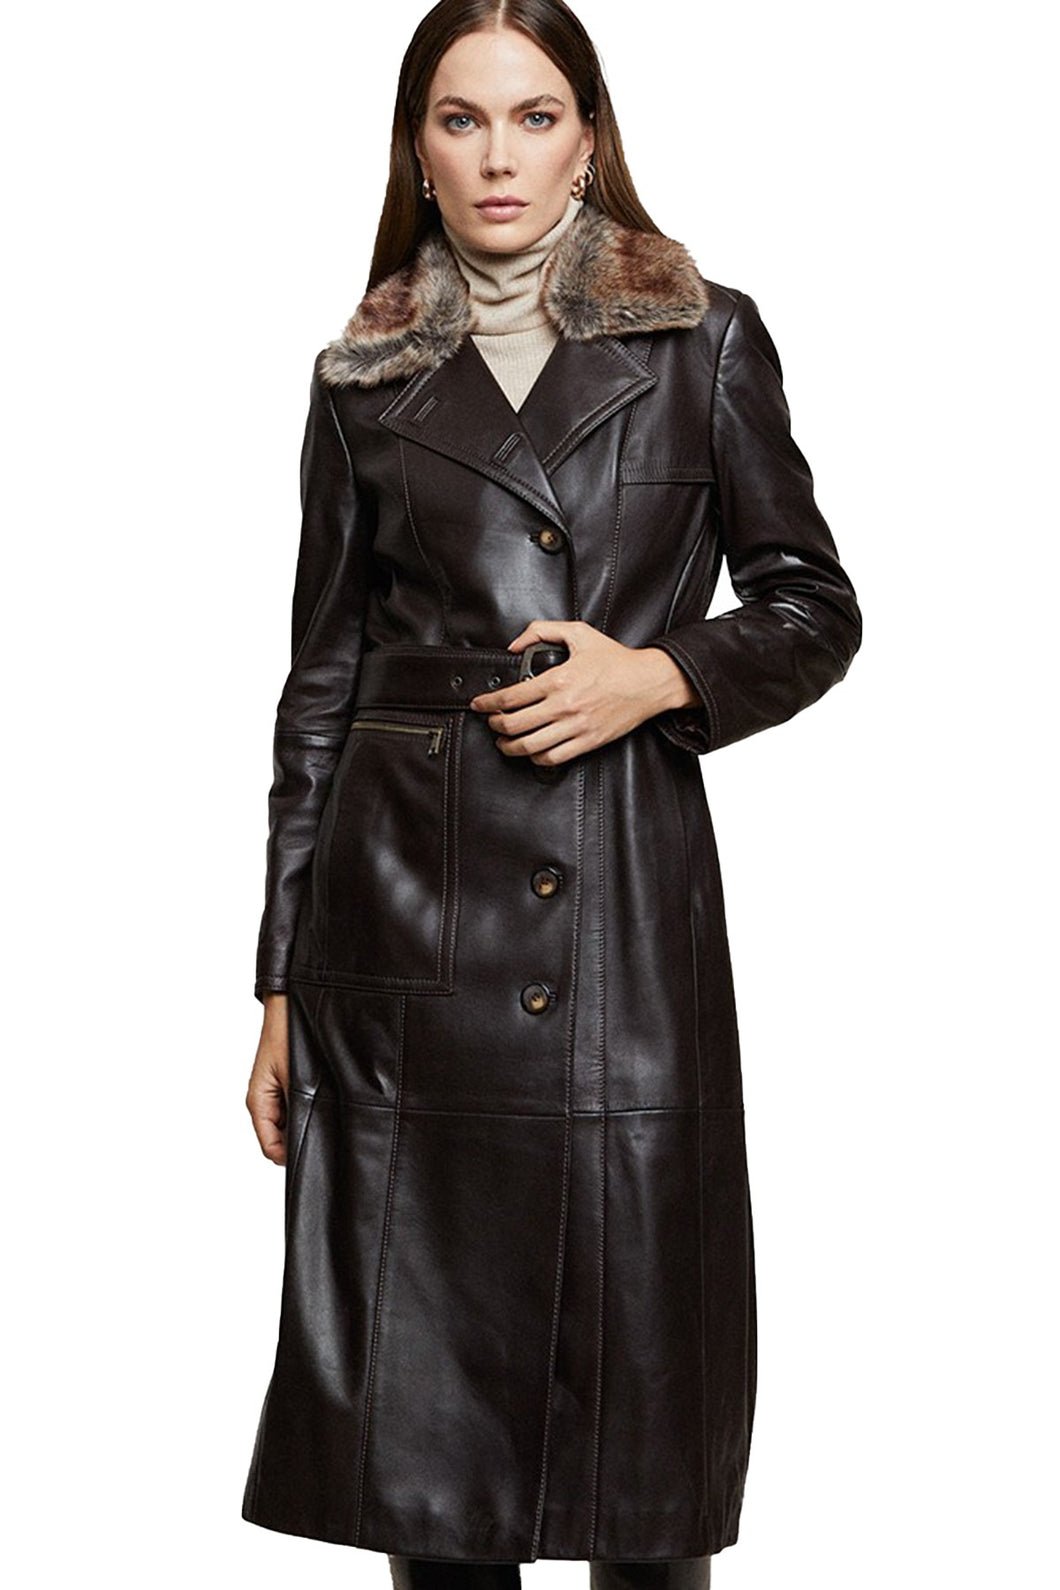 Women Genuine Leather Long Coat (Free Home Delivery Within 7 To 10 Days Worldwide)